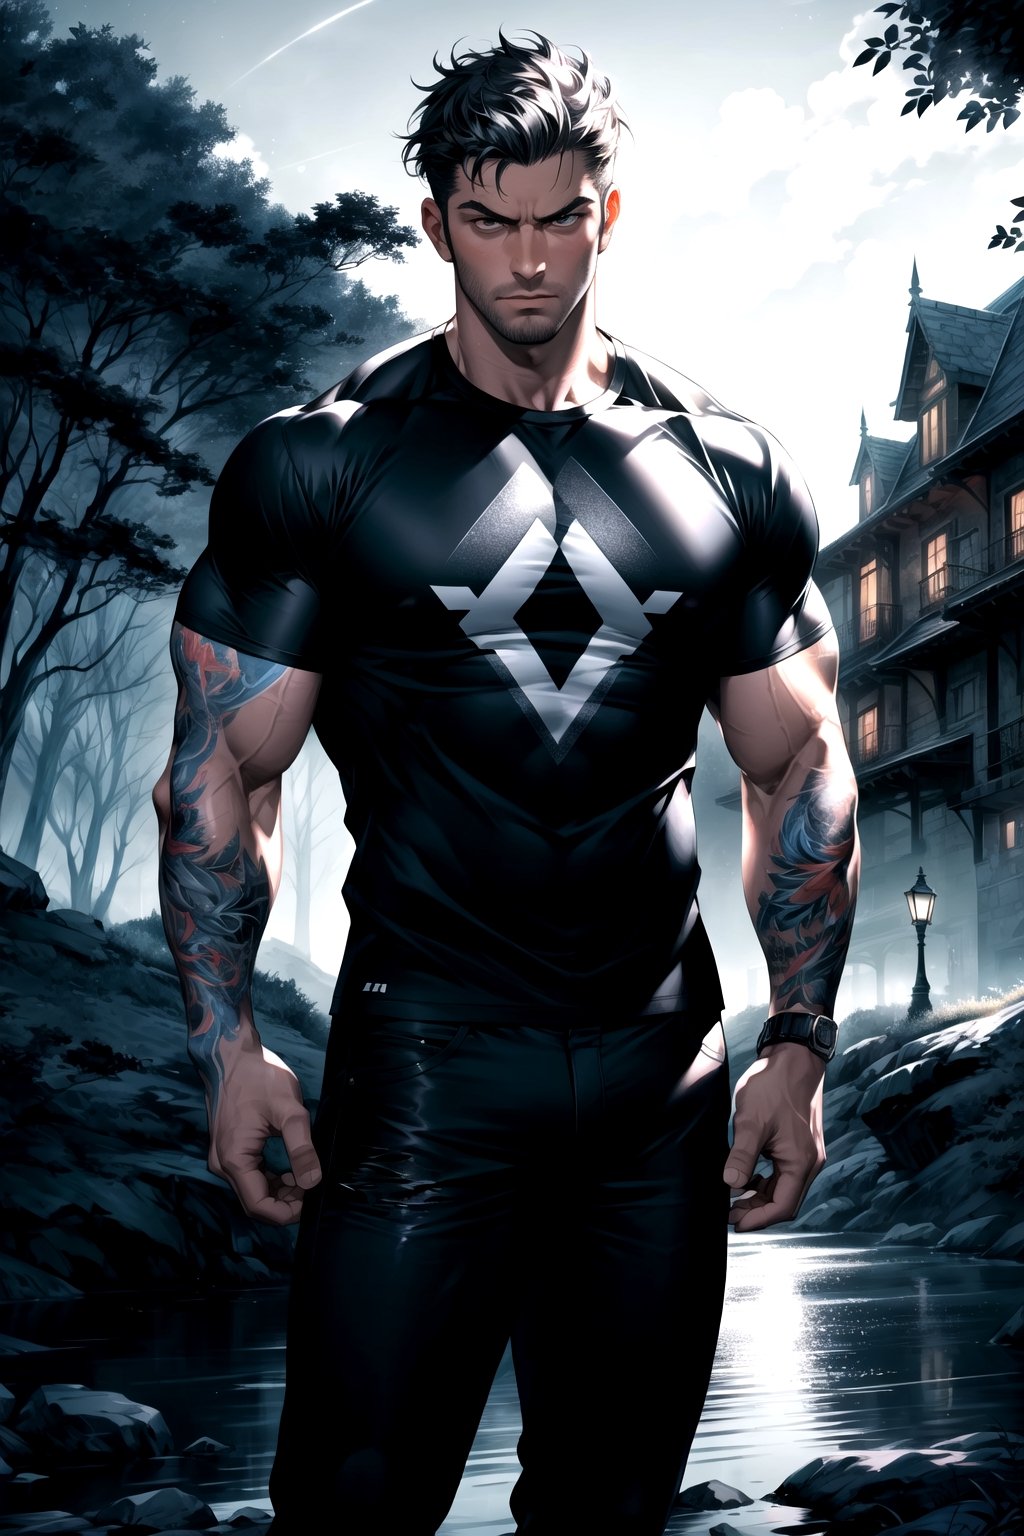 1 boy, serious look, night, mansion background with night trees, muscular t-shirt, black pants, muscular body, mix of fantasy and realism, ultra hd, hdr, 4k